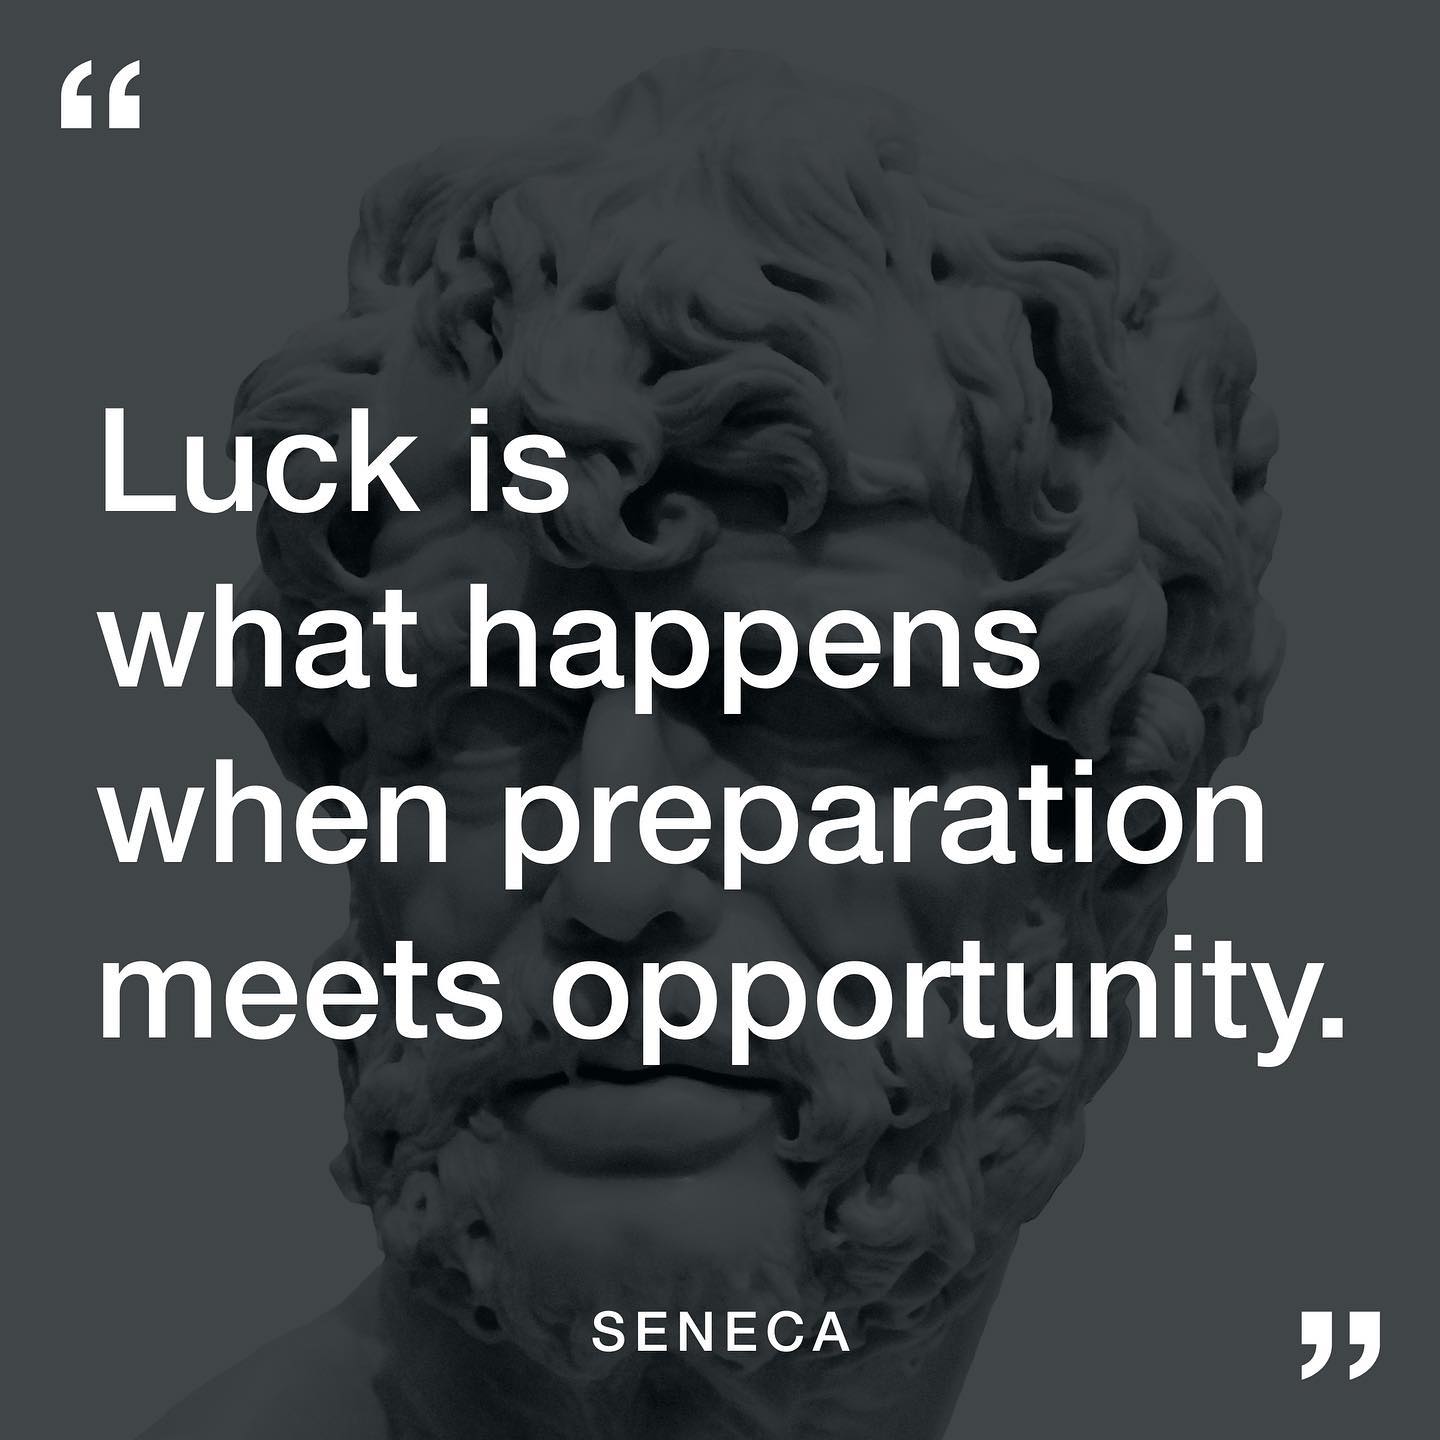 Luck is what happens when preparation meets opportunity.’